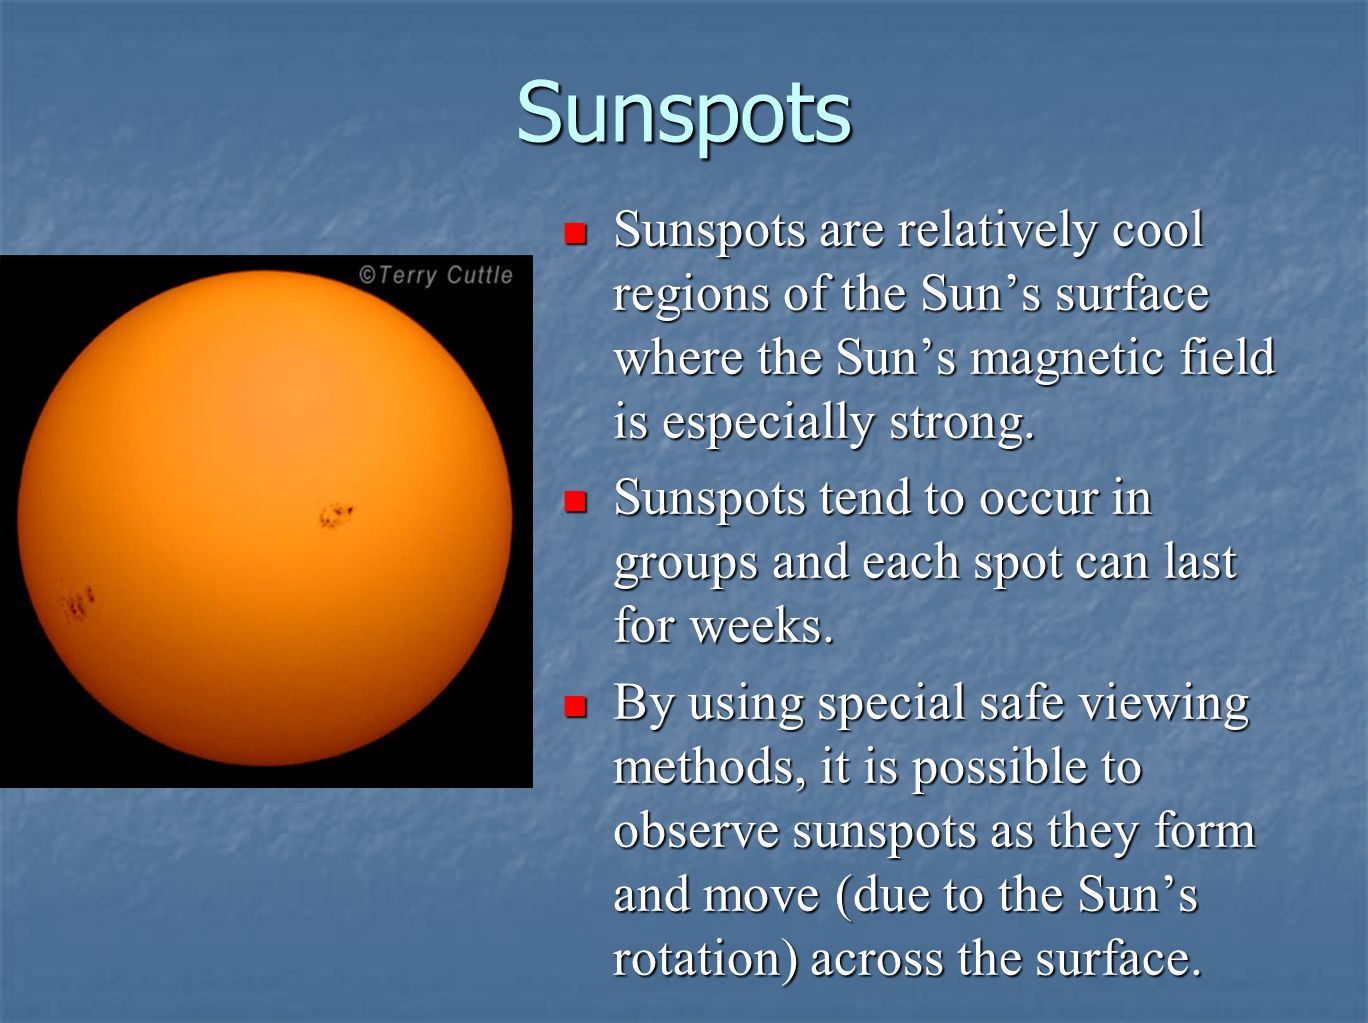 Sunspots Sunspots are relatively cool regions of the Sun’s surface where the Sun’s magnetic field is especially strong.